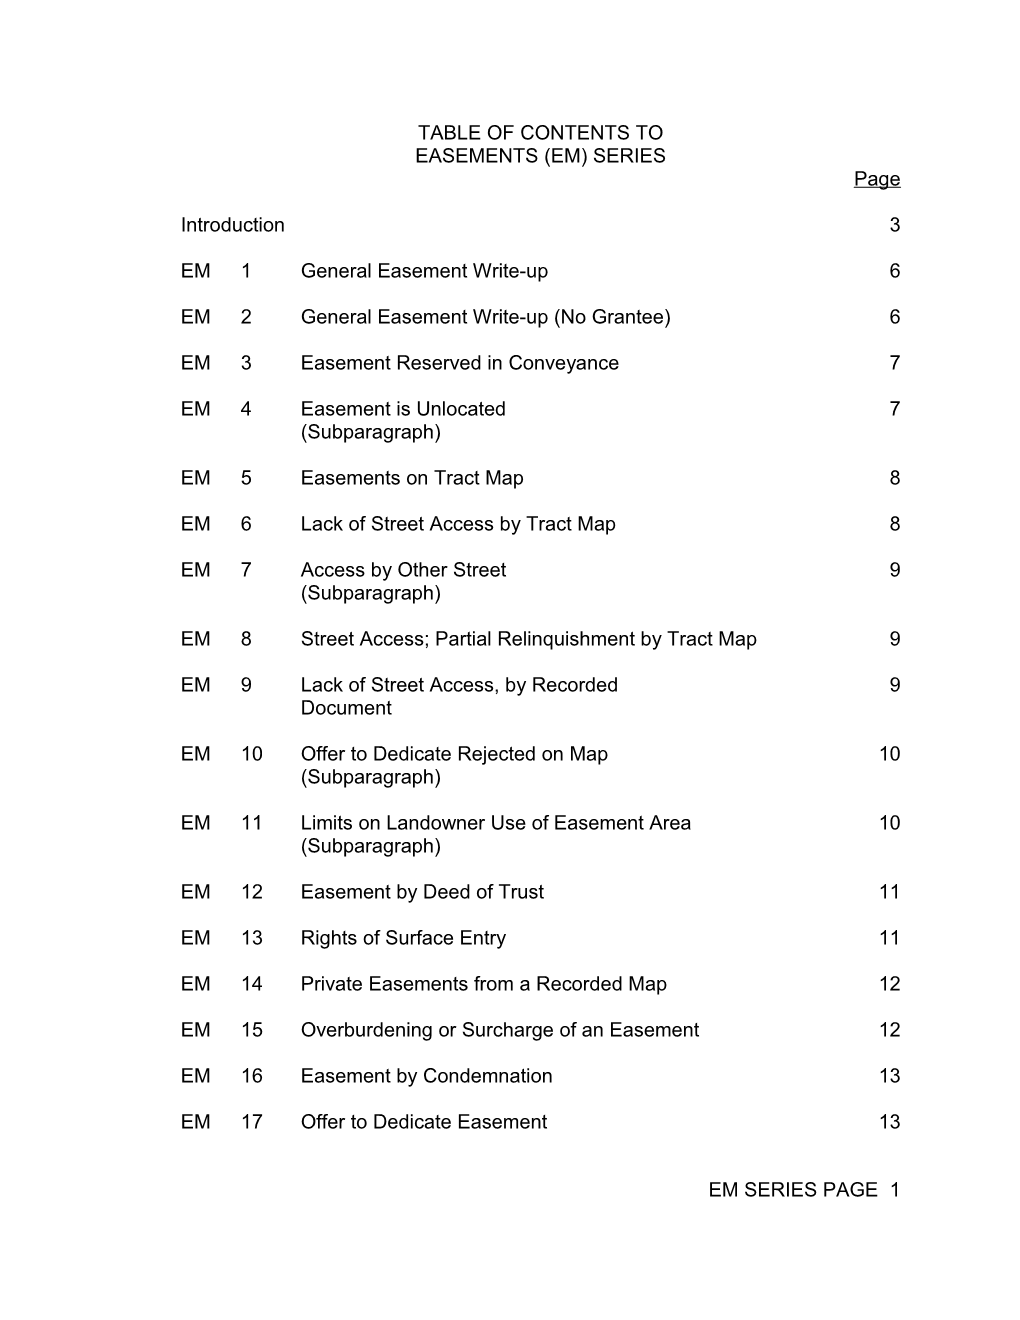 Table of Contents To